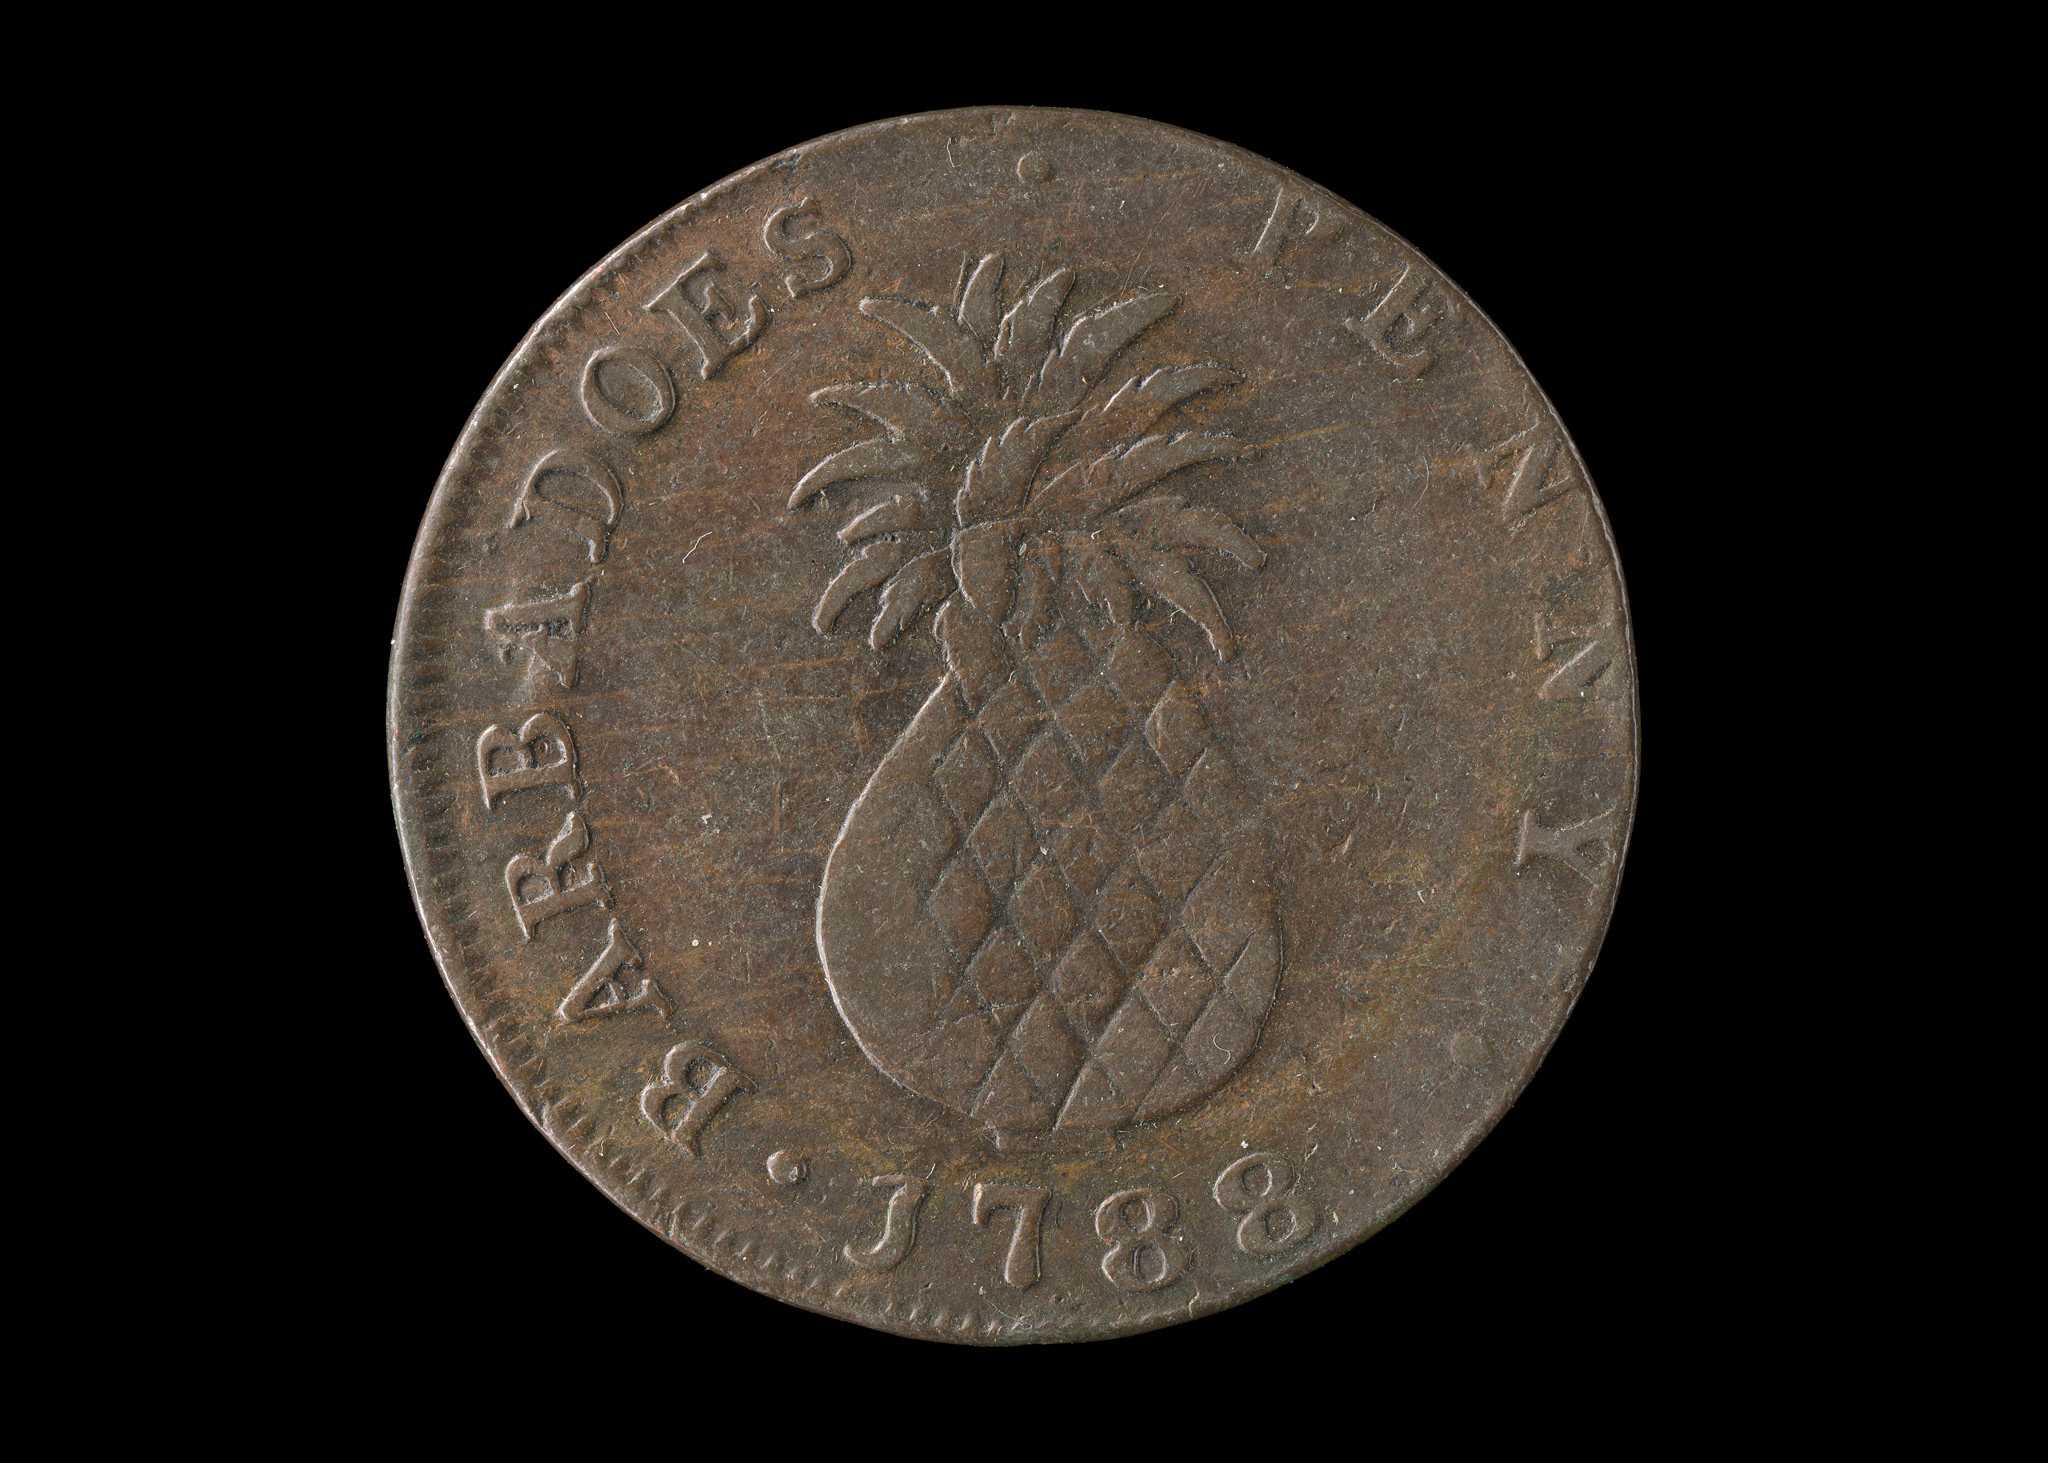 Barbados penny from 1788. One side of the coin shows an African figure in profile wearing a plumed crown with [I ∙ SERVE] at the bottom. The other side depicts a large pineapple. Around the border [BARBADOES [sic] ∙ PENNY ∙ 1788] is in raised relief. The coin is tarnished and shows wear.